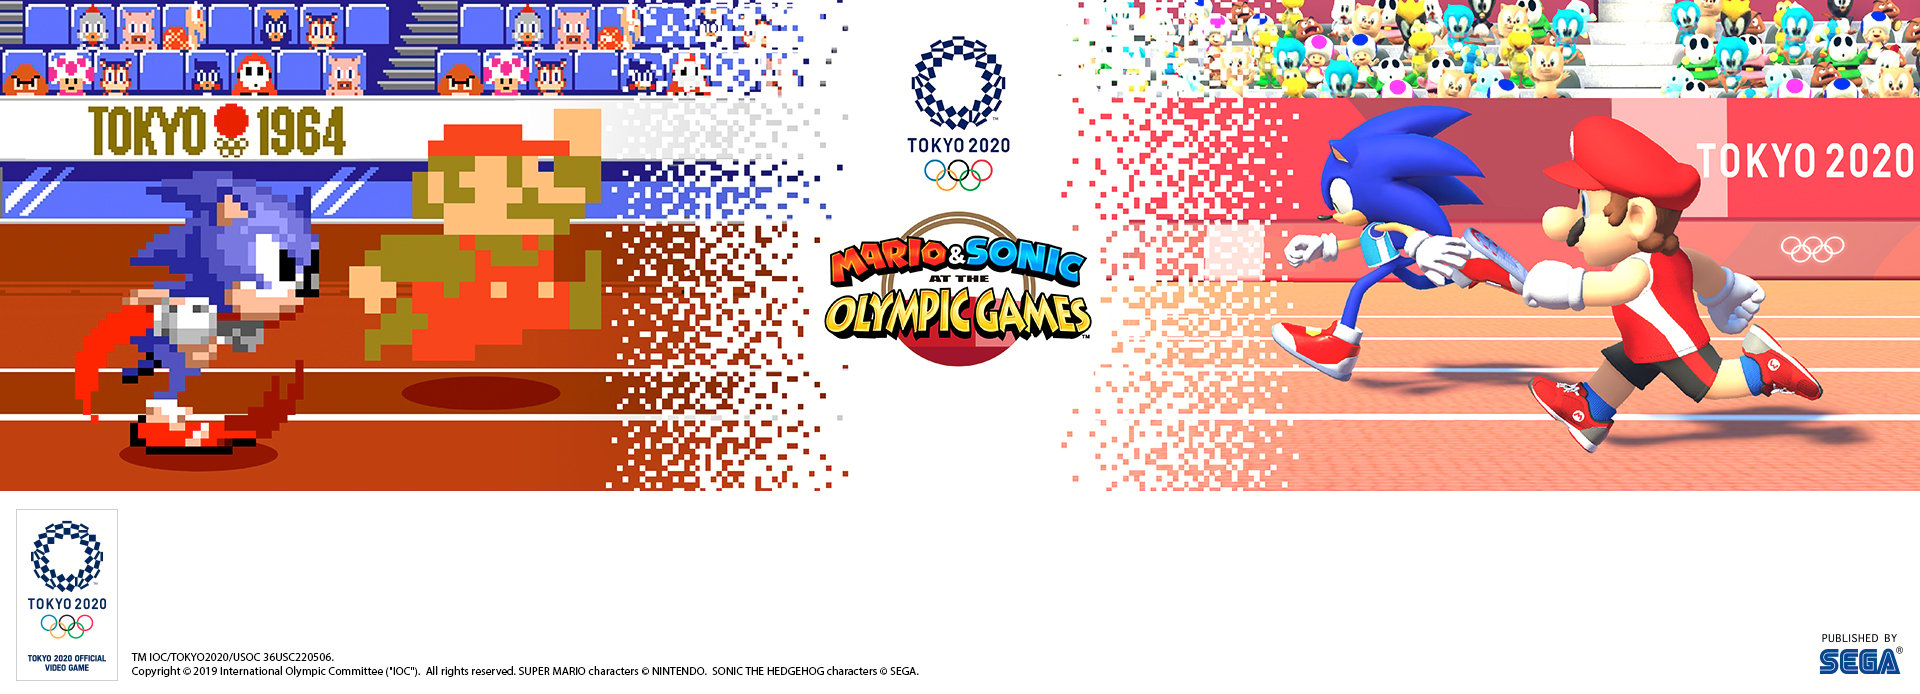 Mario & Sonic at the Olympic Games Tokyo 2020 Reveals Classic 2D